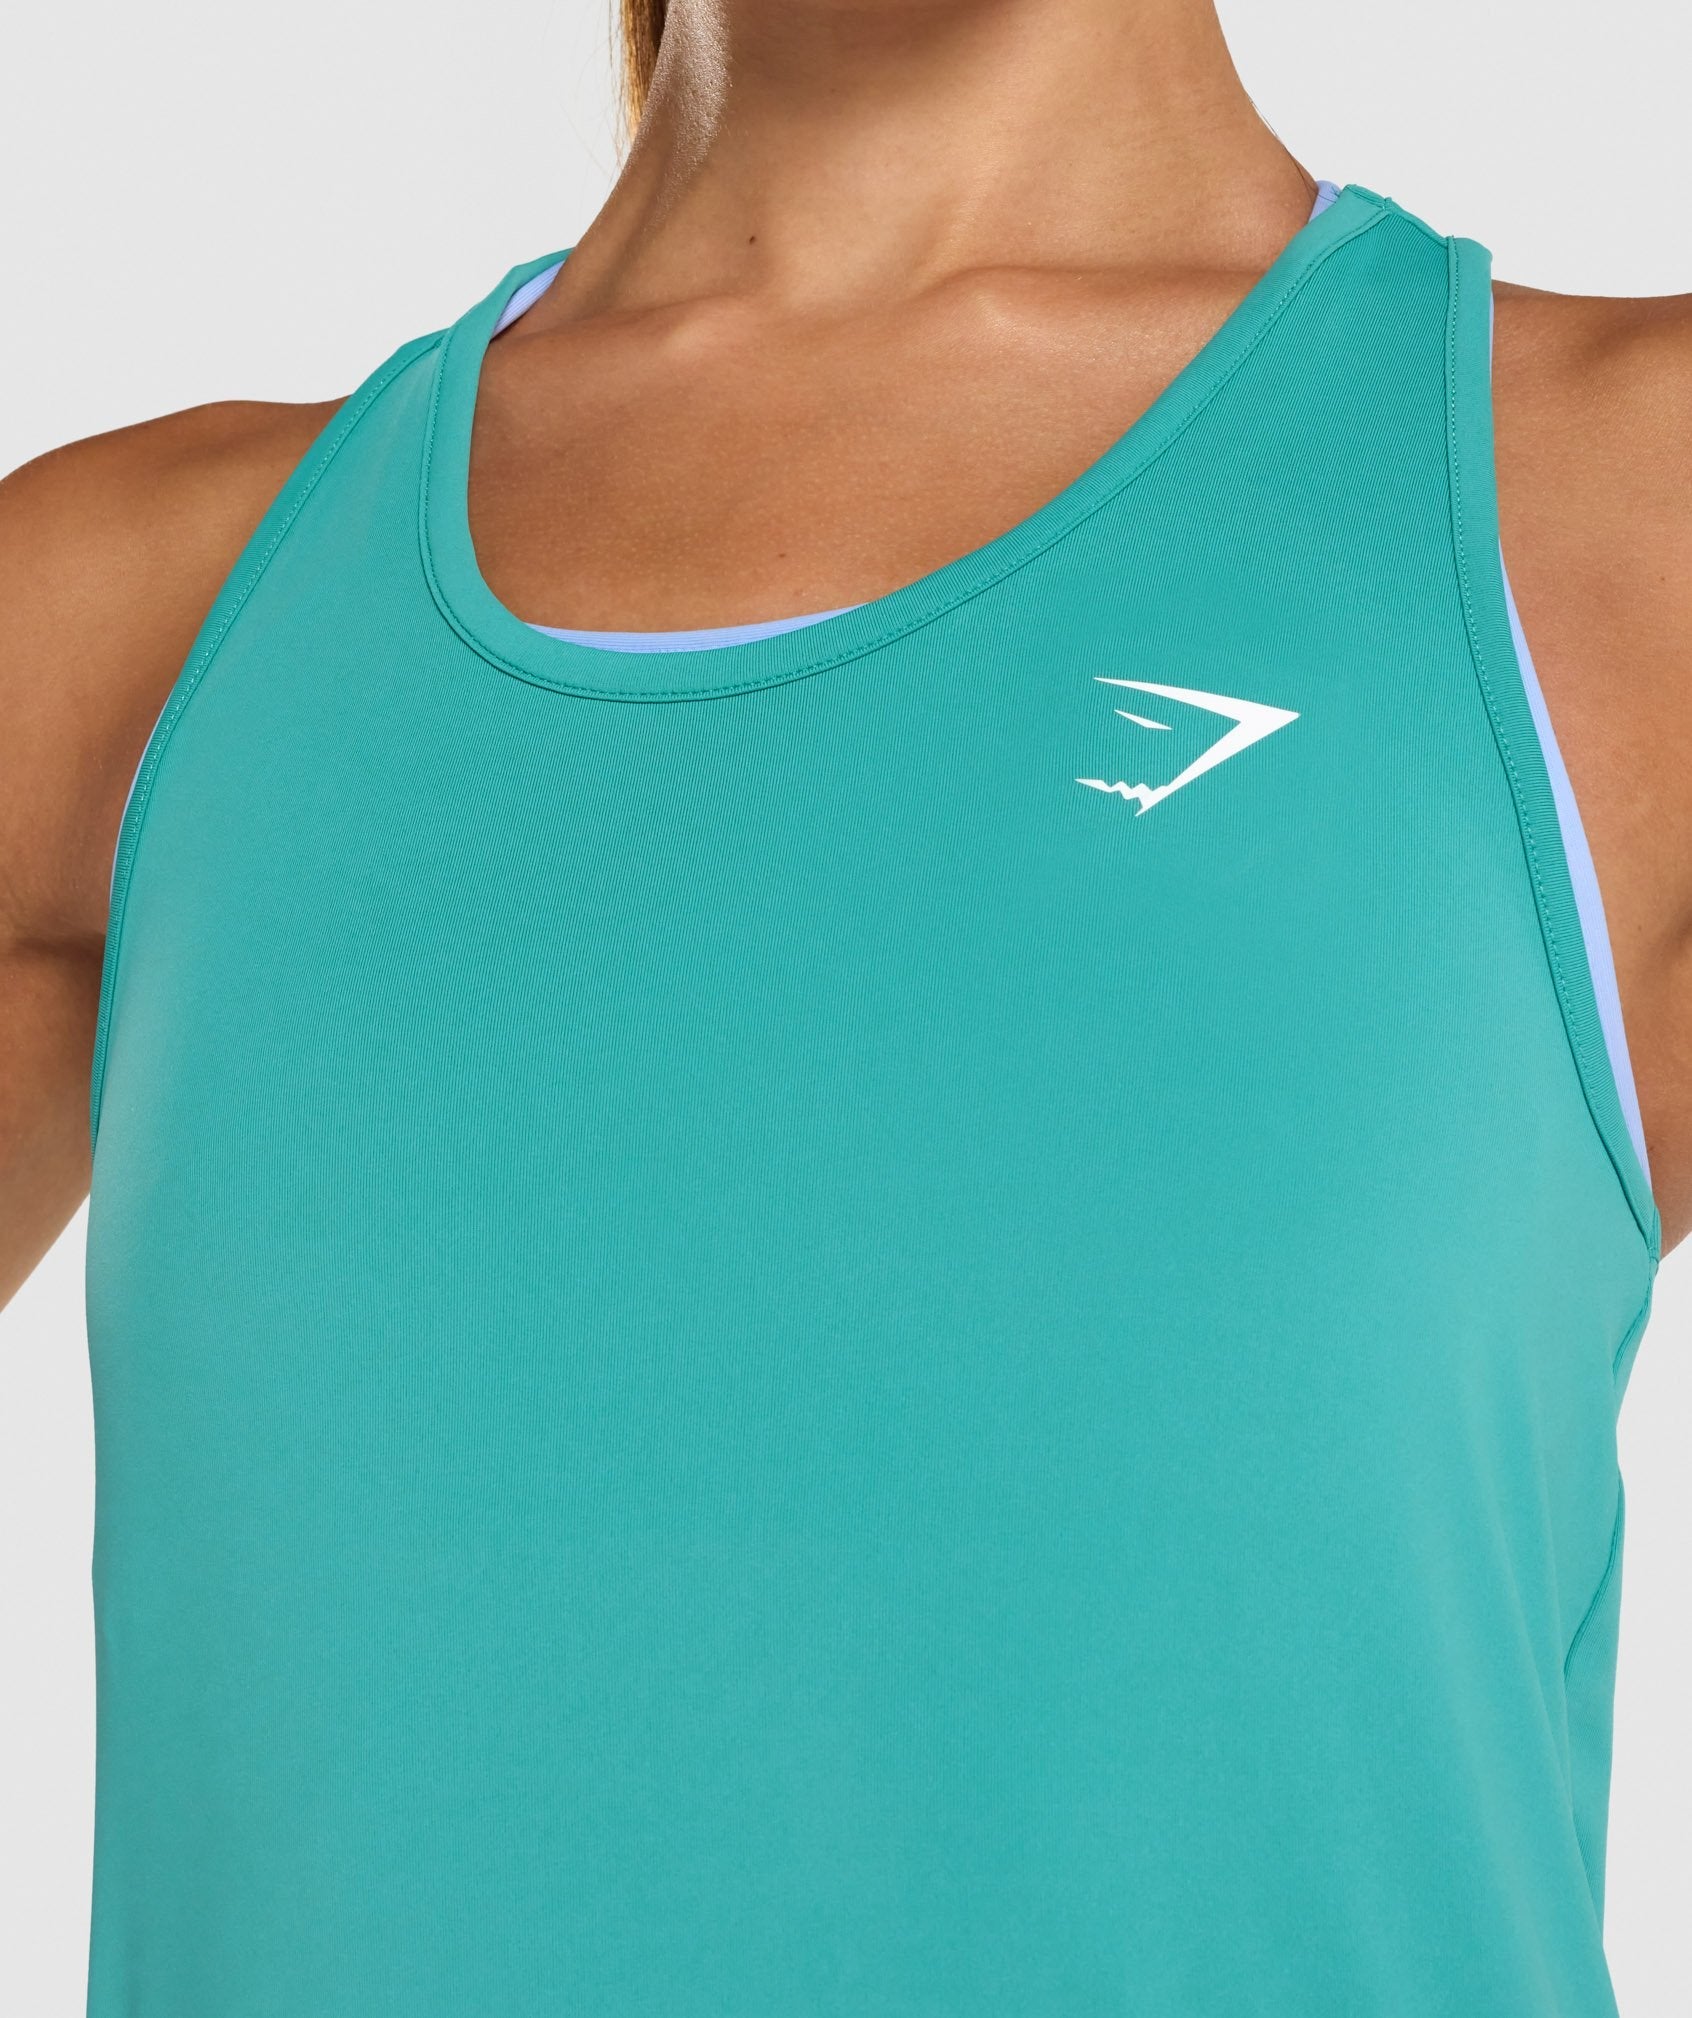 Training Vest in Teal - view 6